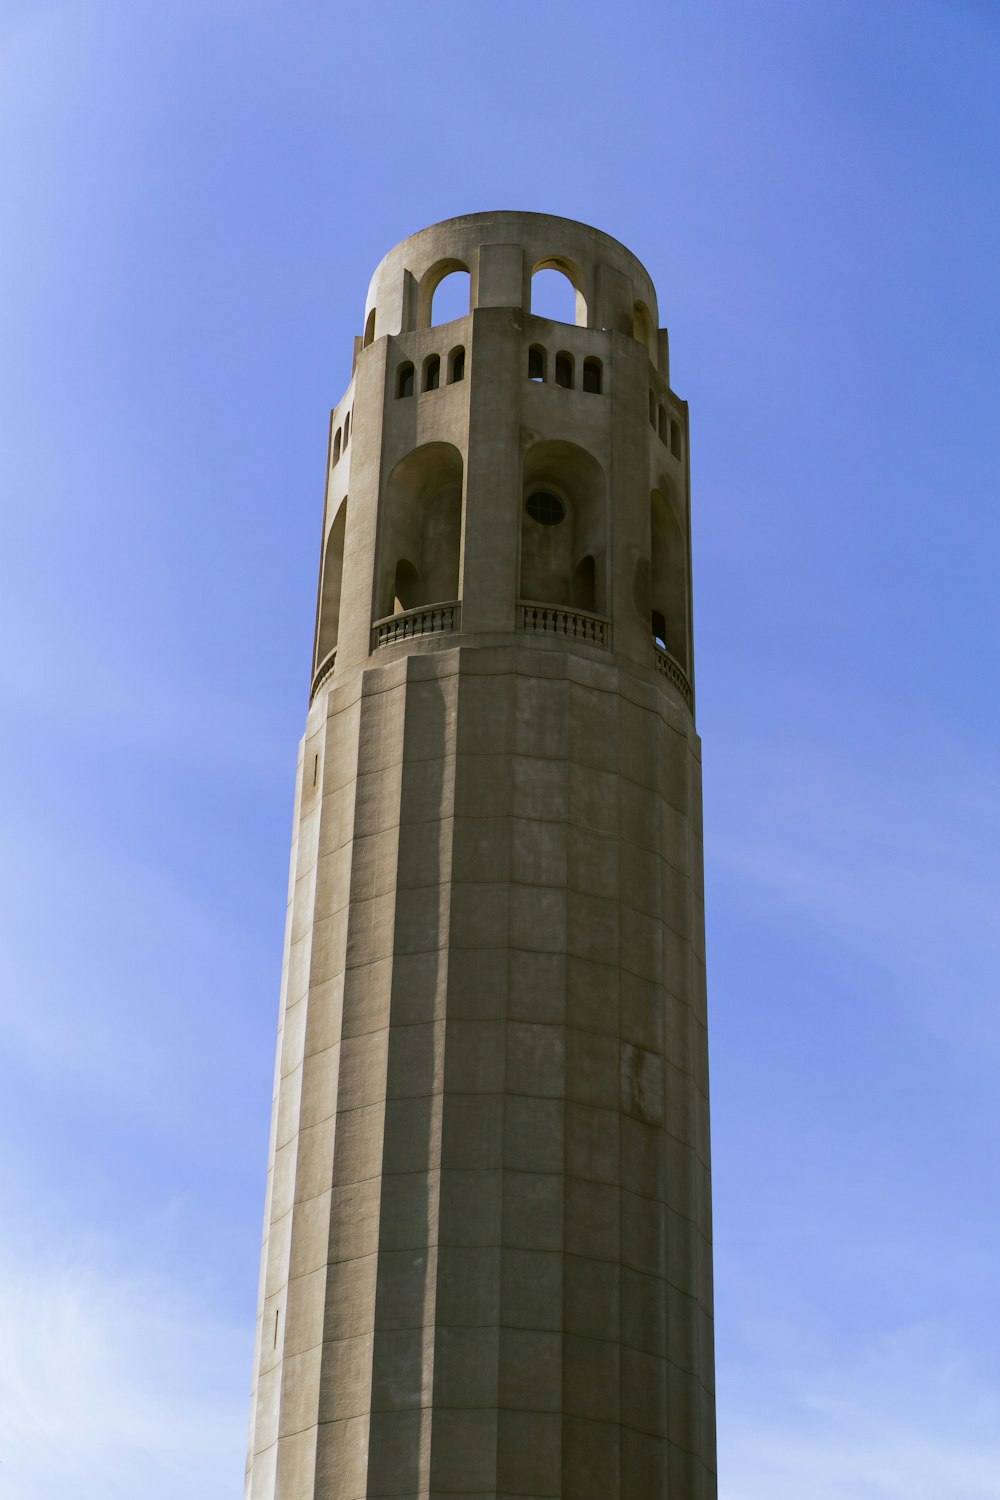 a tall tower with a clock on the top of it